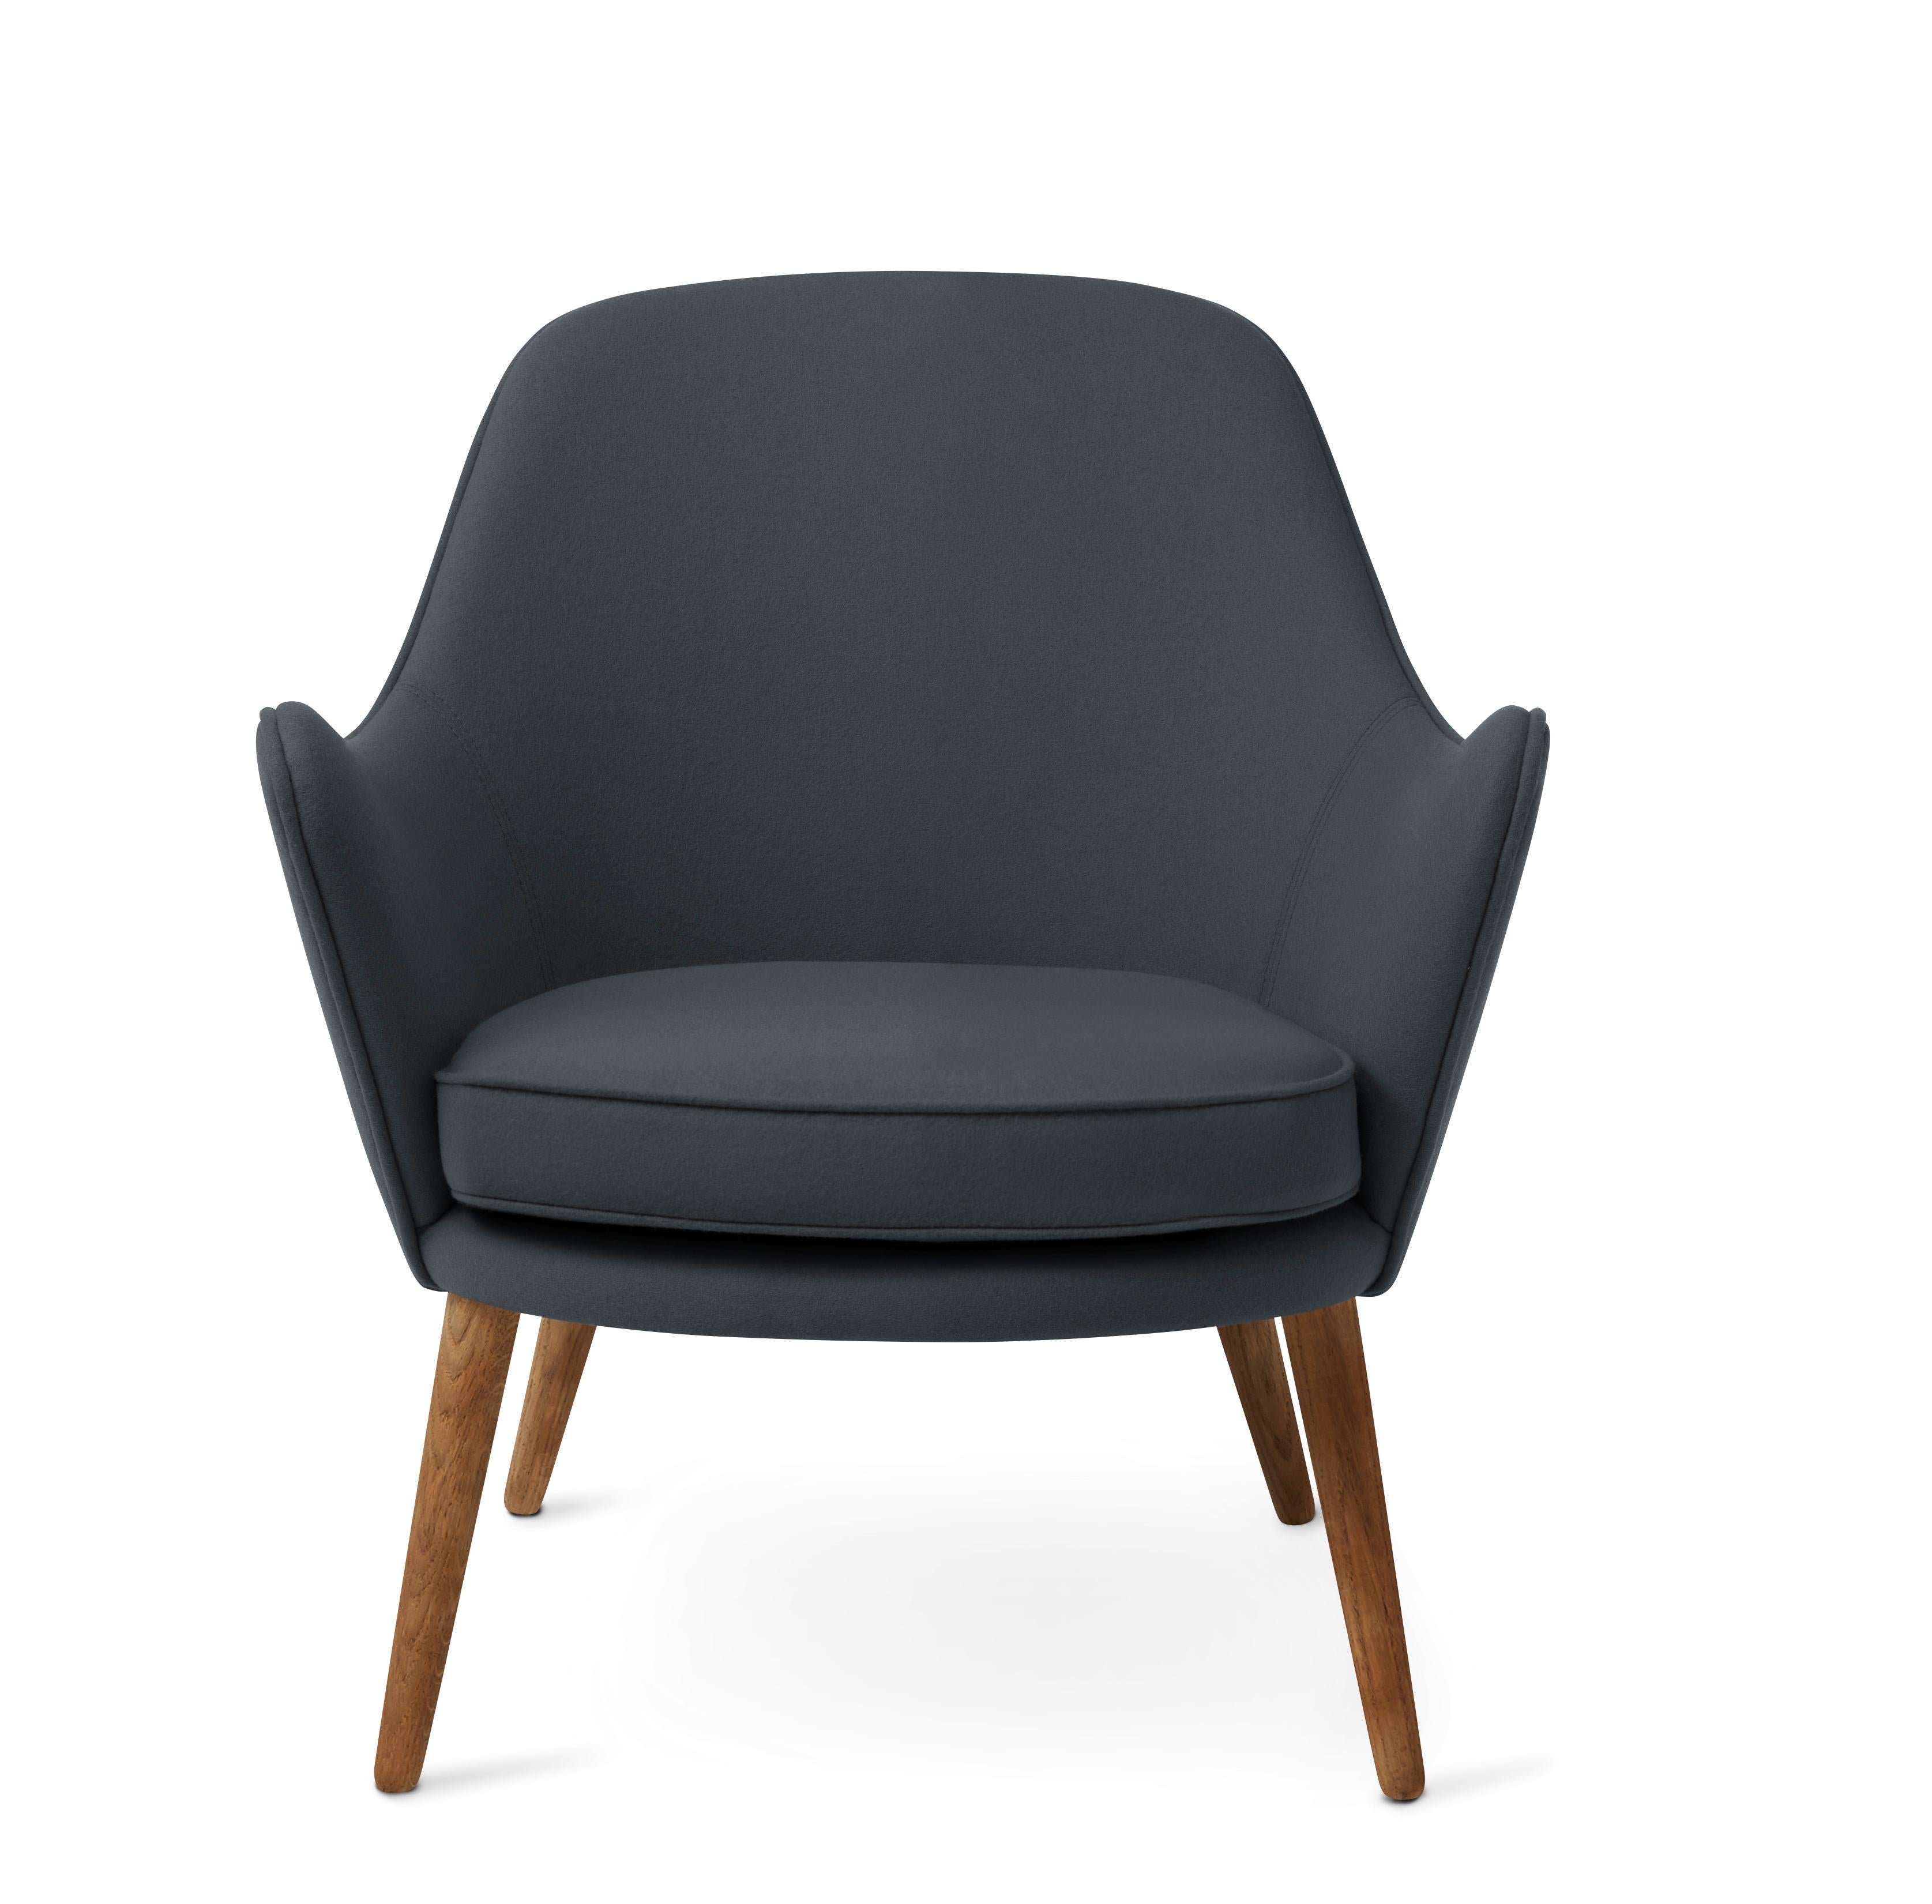 For Sale: Blue (Hero 991) Dwell Lounge Chair, by Hans Olsen from Warm Nordic